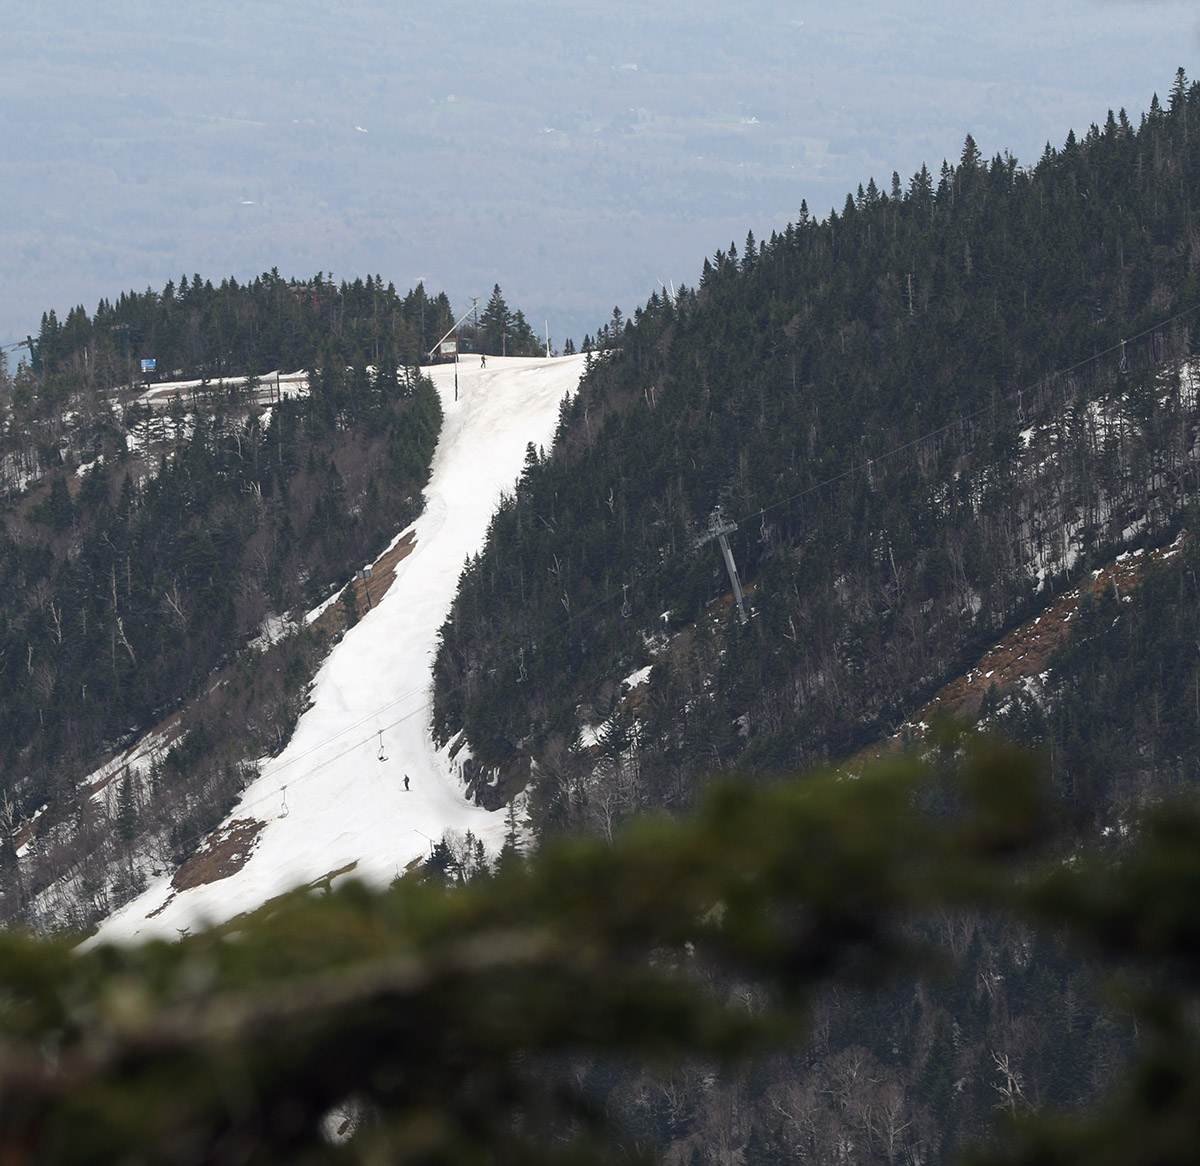 An image of the Nosedive trail on Mt. Mansfield as viewed from the Gondola Summit station during an April ski tour at Stowe Mountain Resort in Vermont